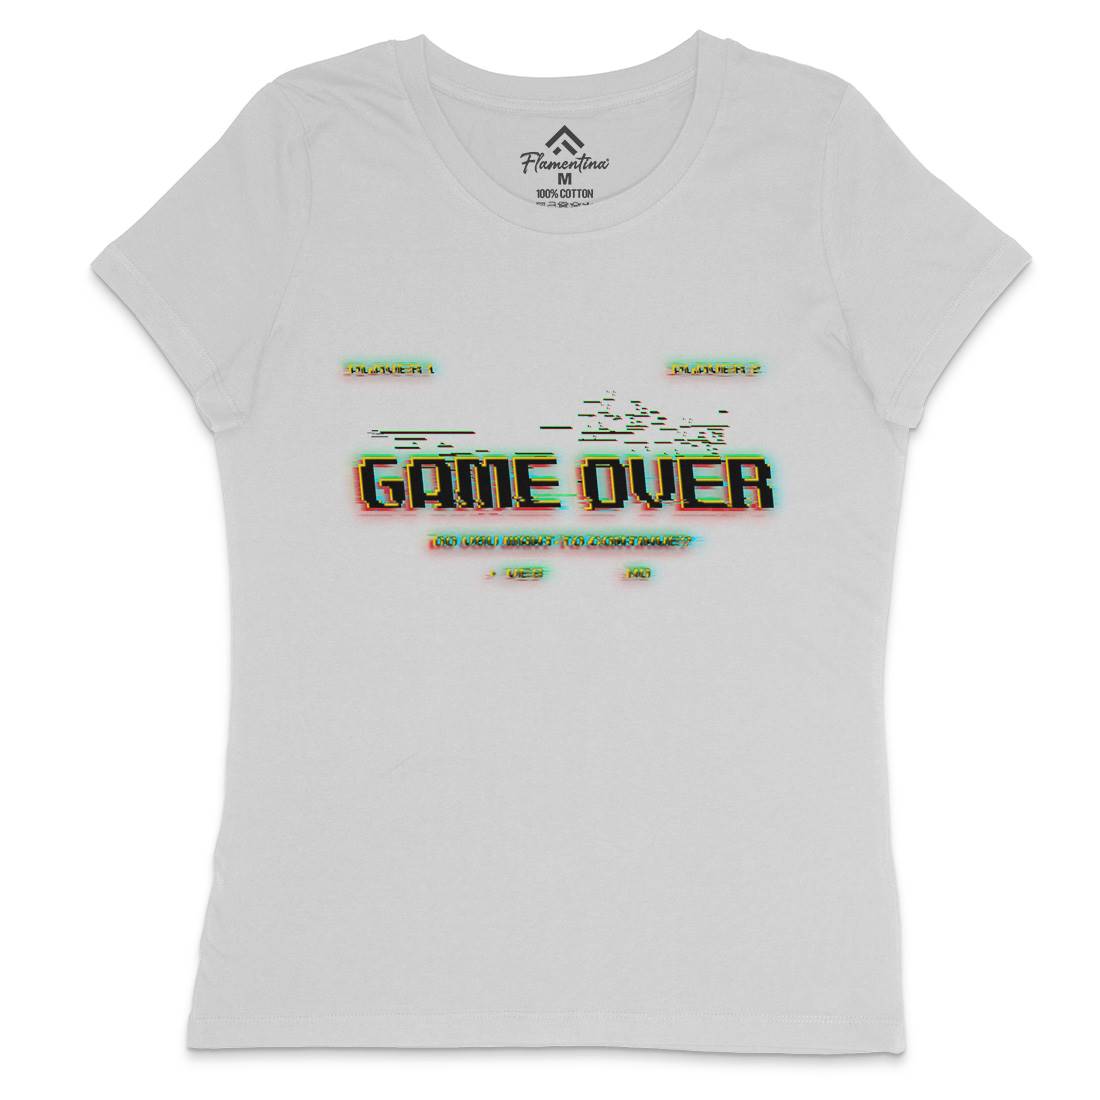 Game Over Continue Womens Crew Neck T-Shirt Geek B999